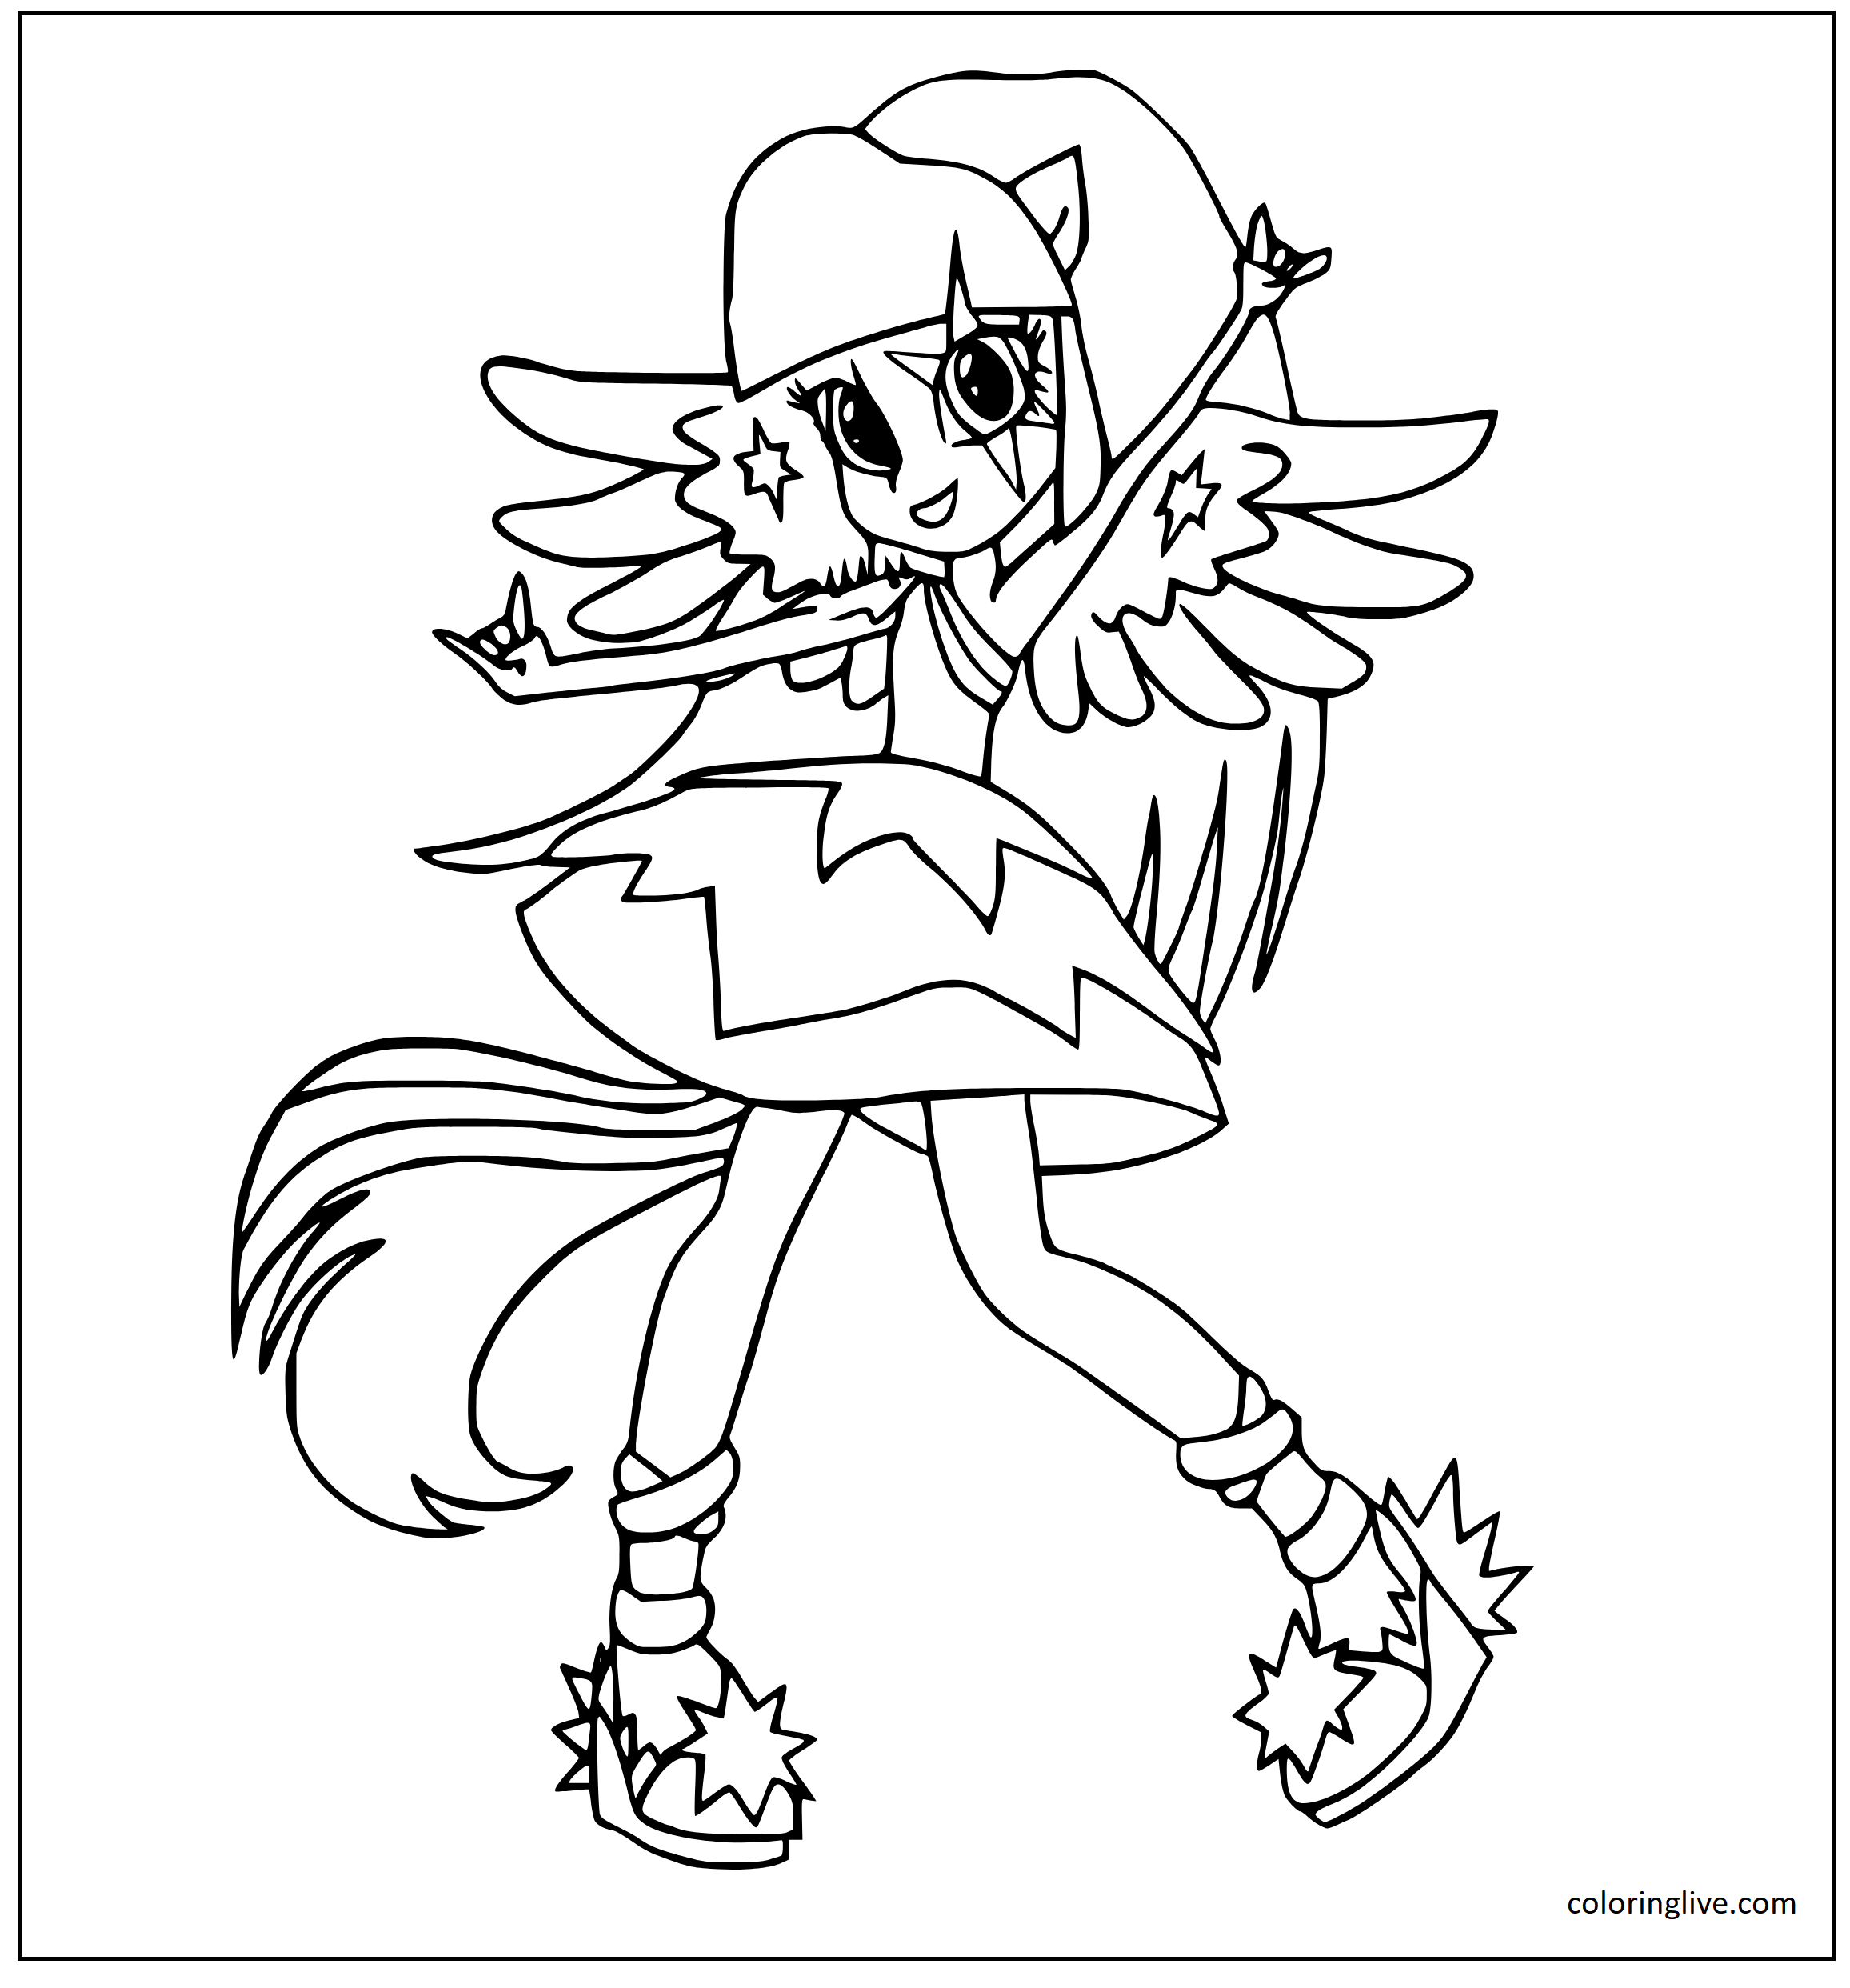 Printable Twilight Sparkle Coloring Page for kids.